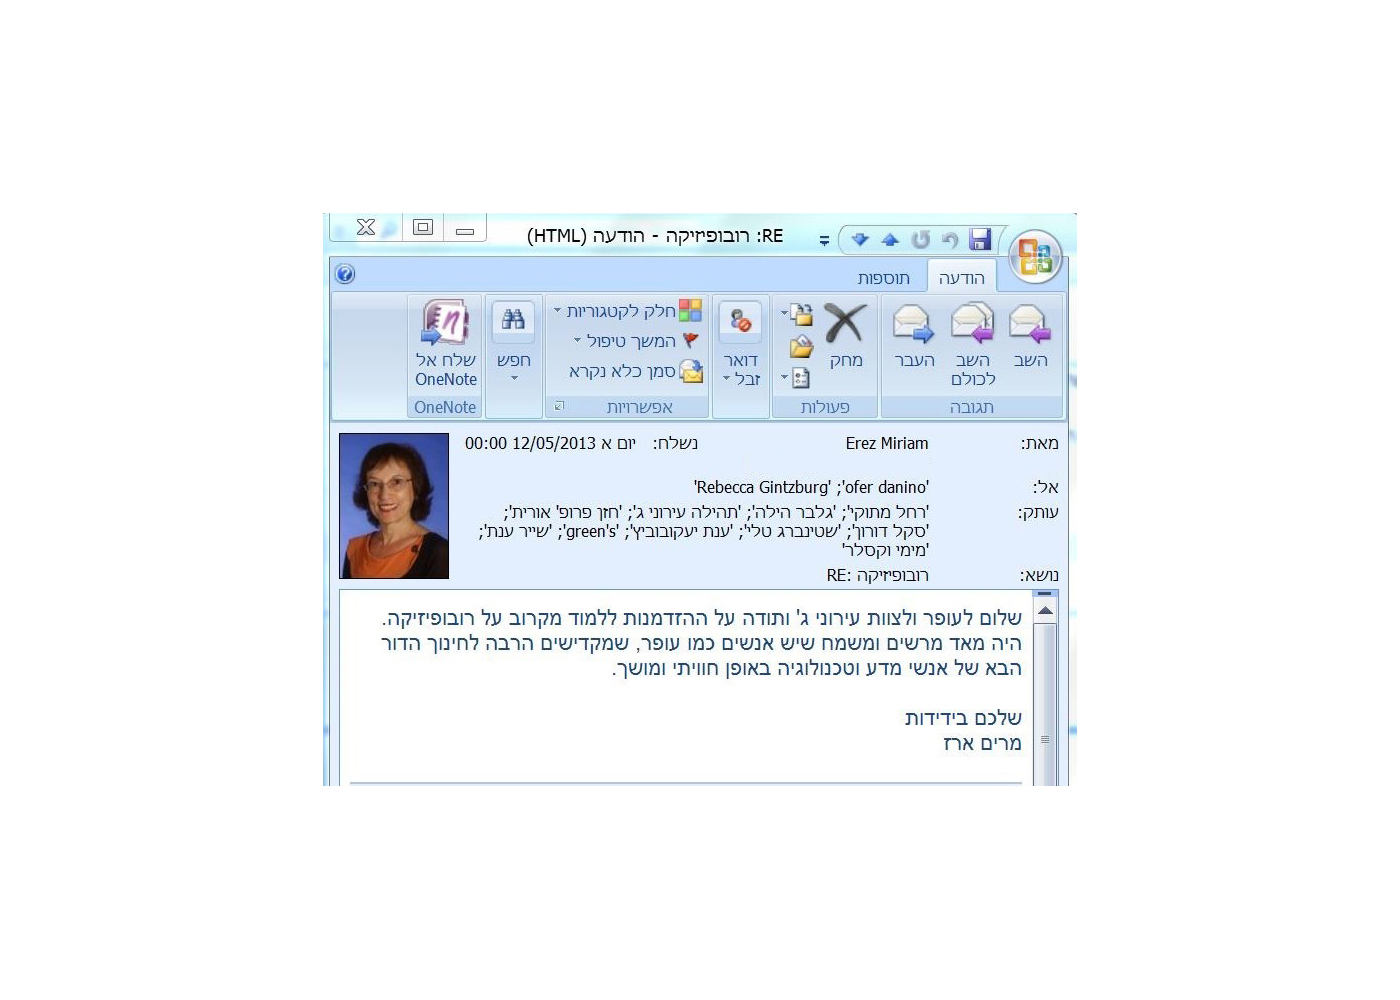 Letter of appreciation from Professor Miriam Erez - Bride of the Israel Prize for the Robophysics course